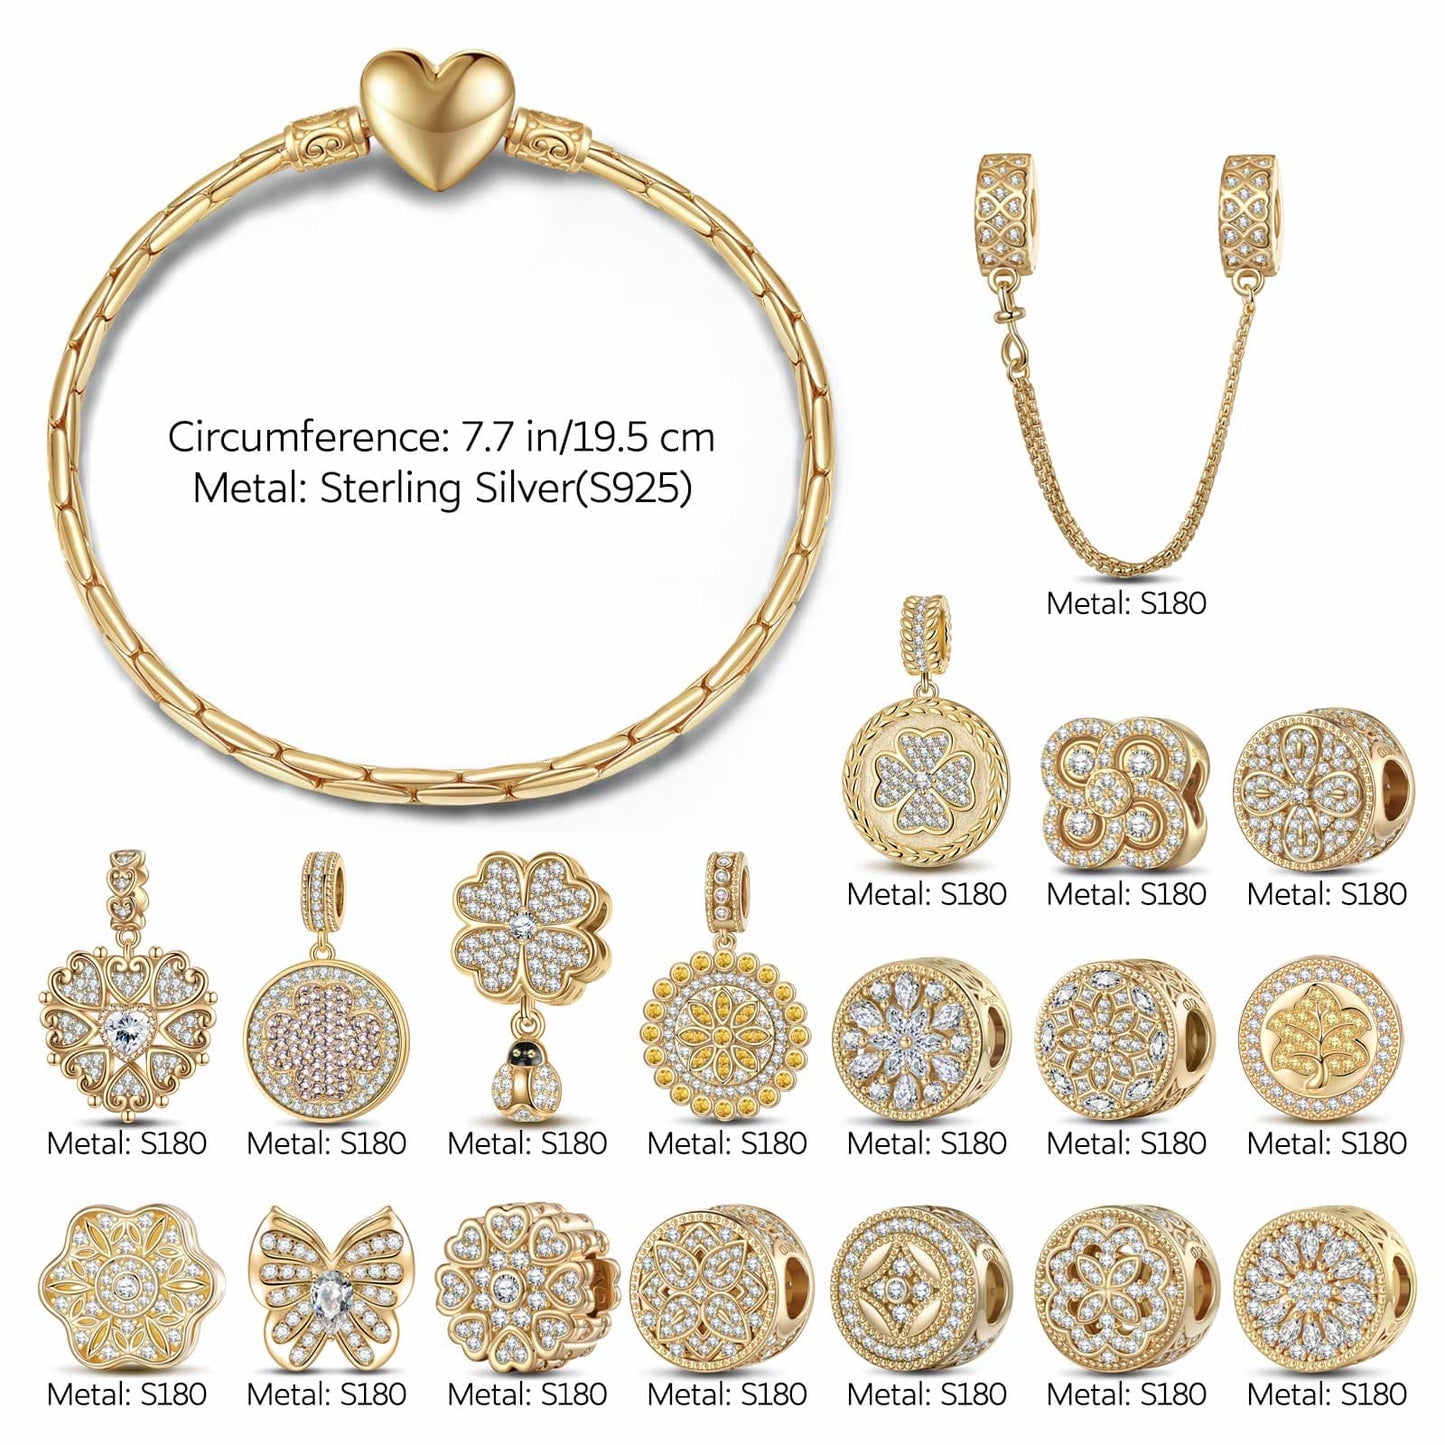 Sterling Silver Versailles Gardens Charms Bracelet Set With Enamel In 14K Gold Plated